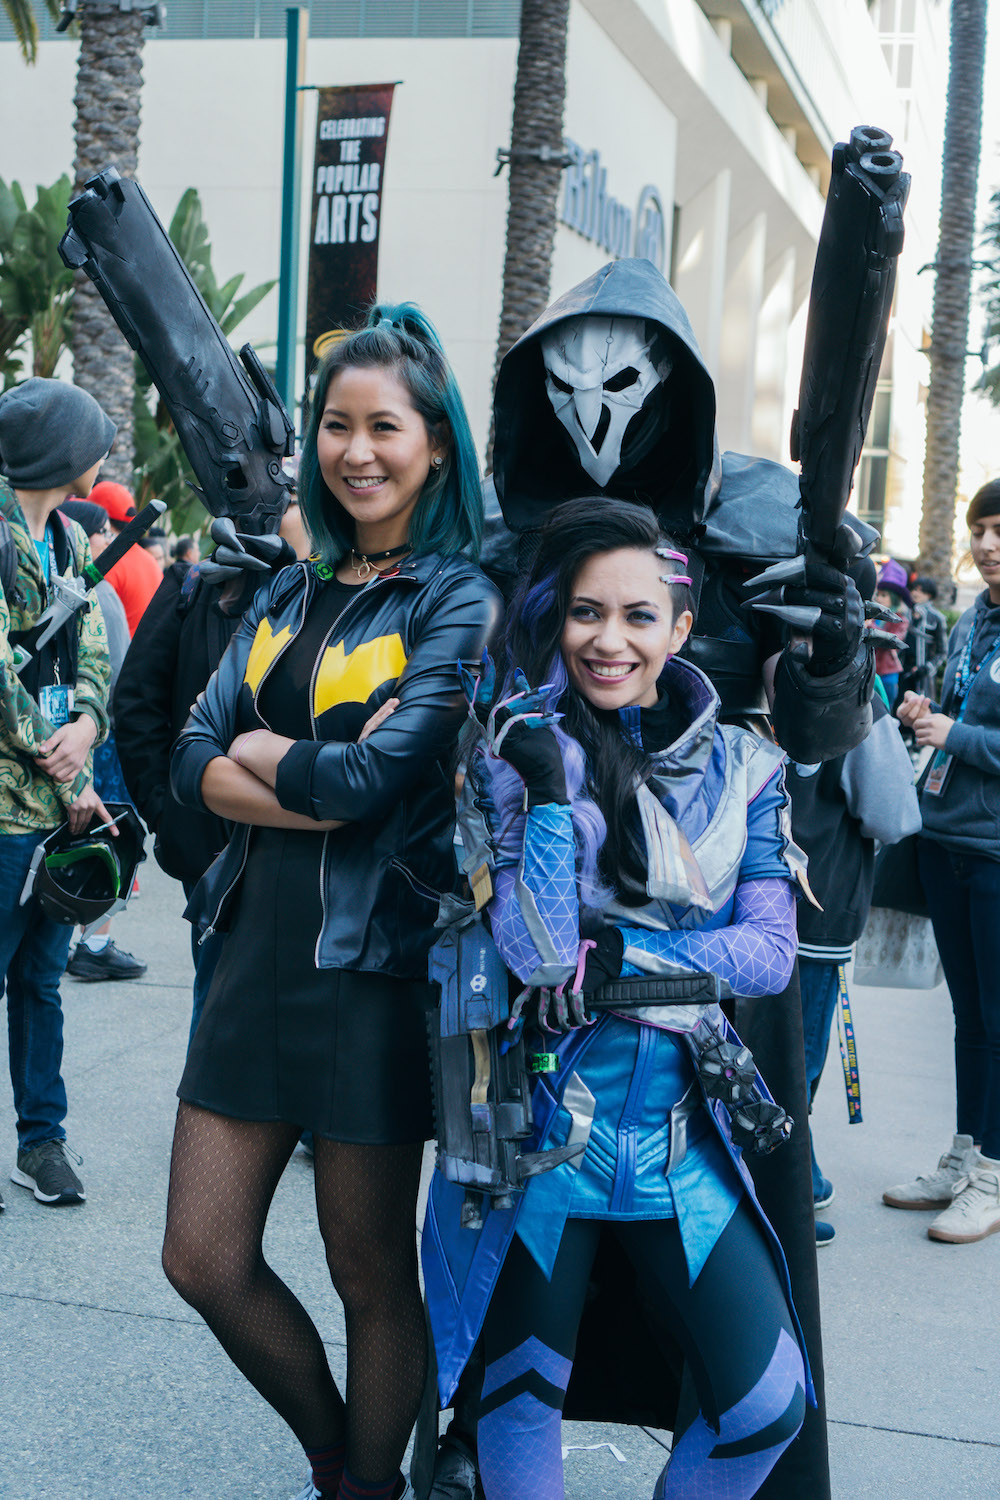 Casual Batgirl of Burnside with Sombra and Reaper cosplay